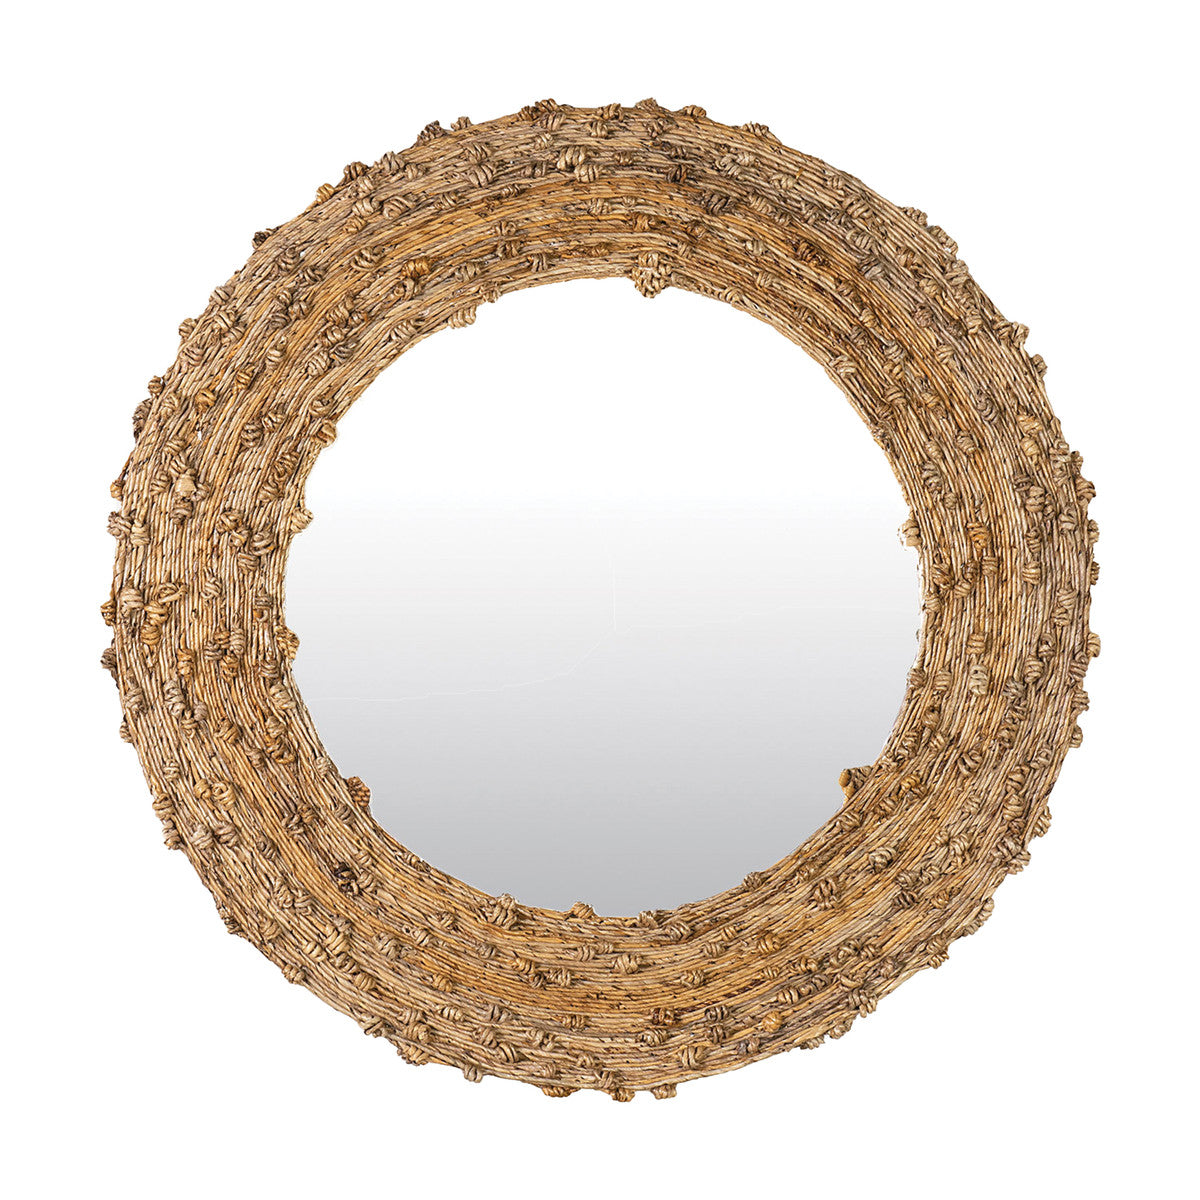 35" Knotted Natural Fiber Round Mirror